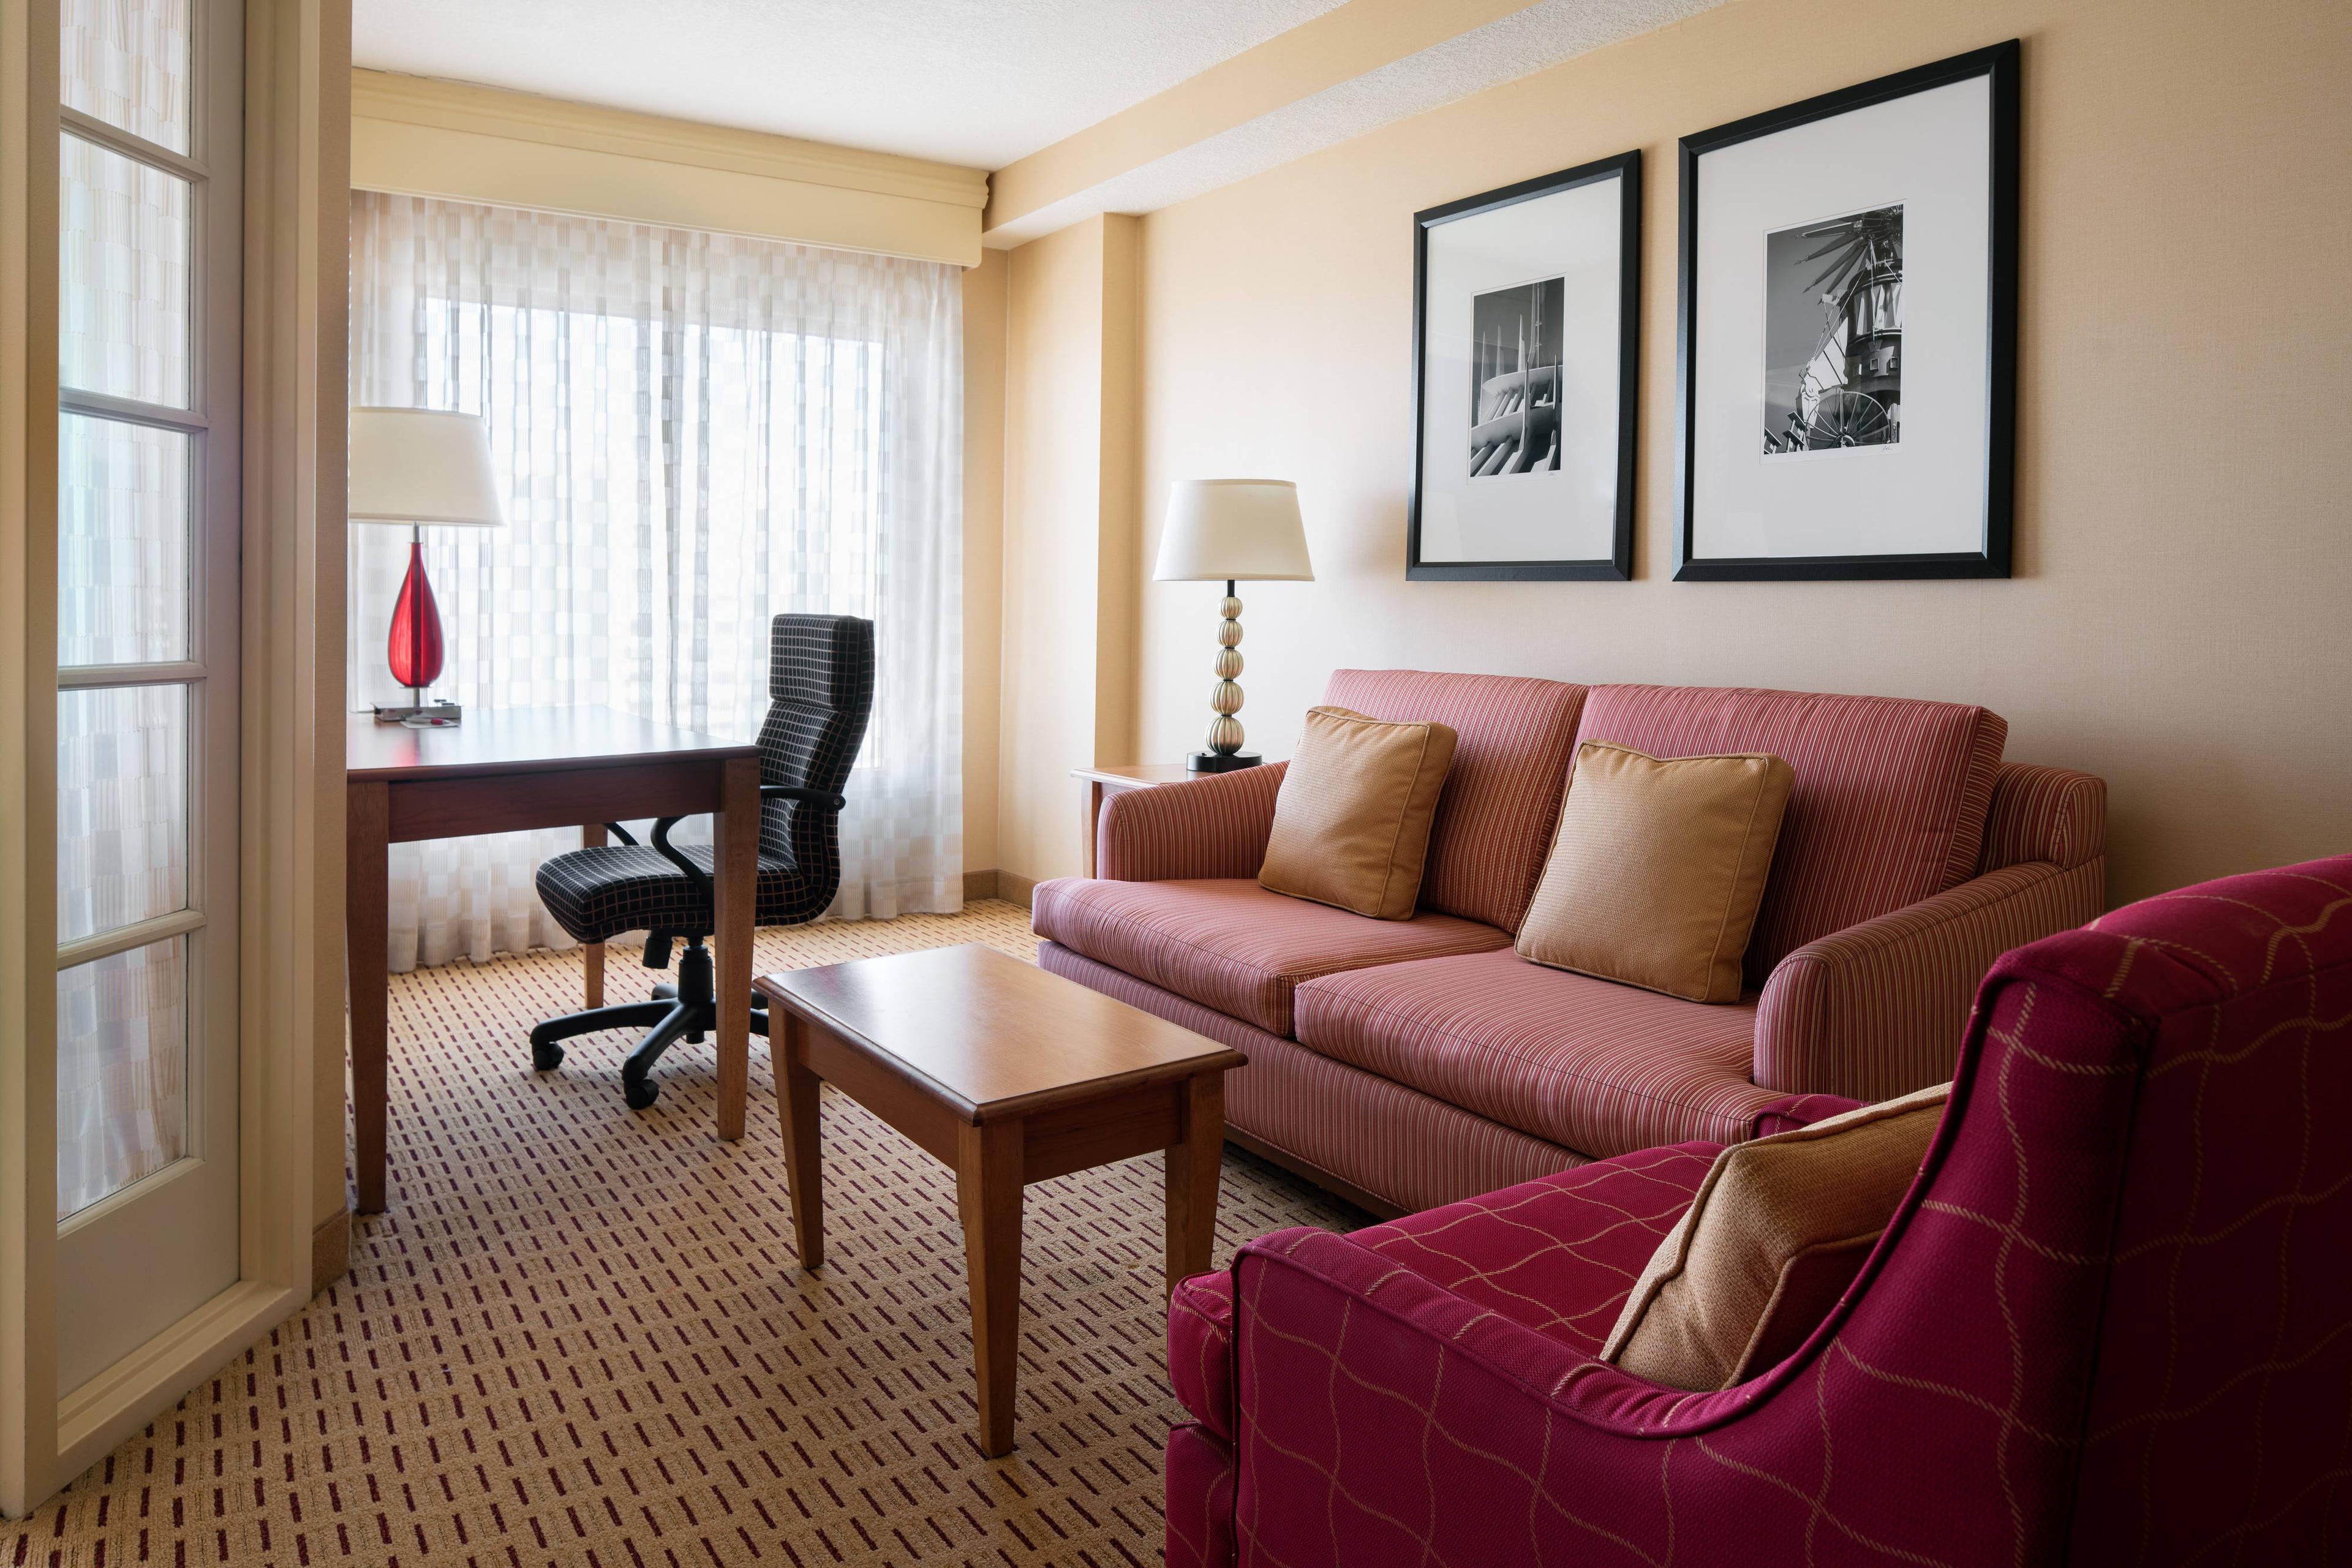 Our King Suites feature a living area with sofa sleeper, flat screen television, and access door to the bathroom.